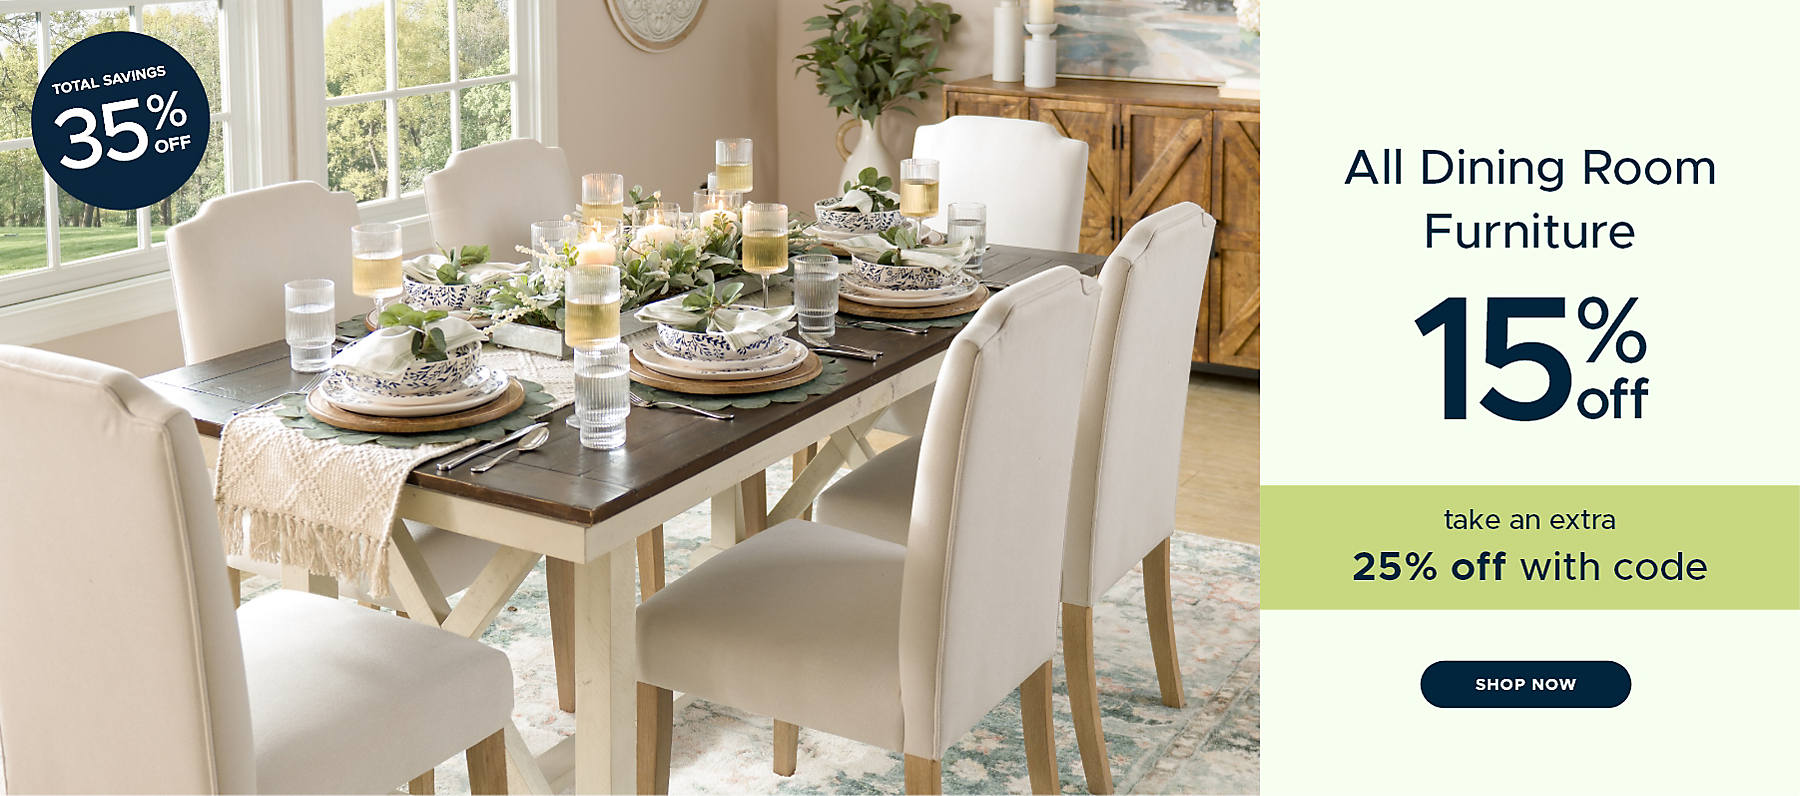 All Dining Room Furniture 15% off take an extra 25% off with code shop now total savings 35% off